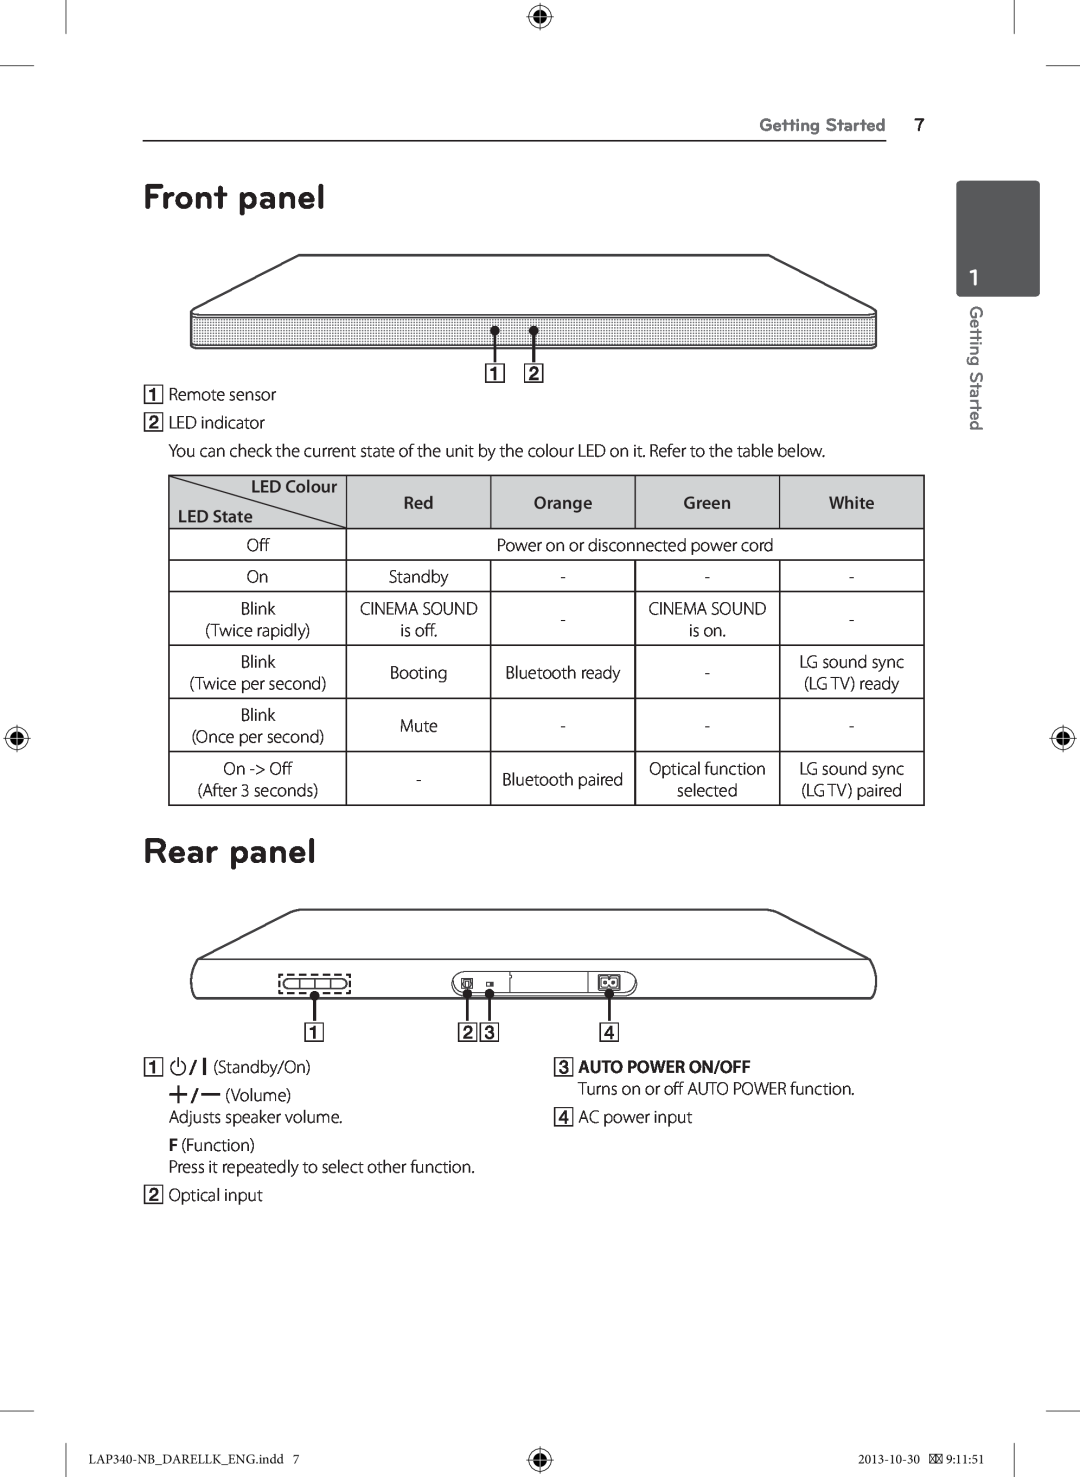 LG Electronics LAP340 Front panel, Rear panel, LED State, A1/! Standby/On, Cauto Power On/Off, o/pVolume, DAC power input 